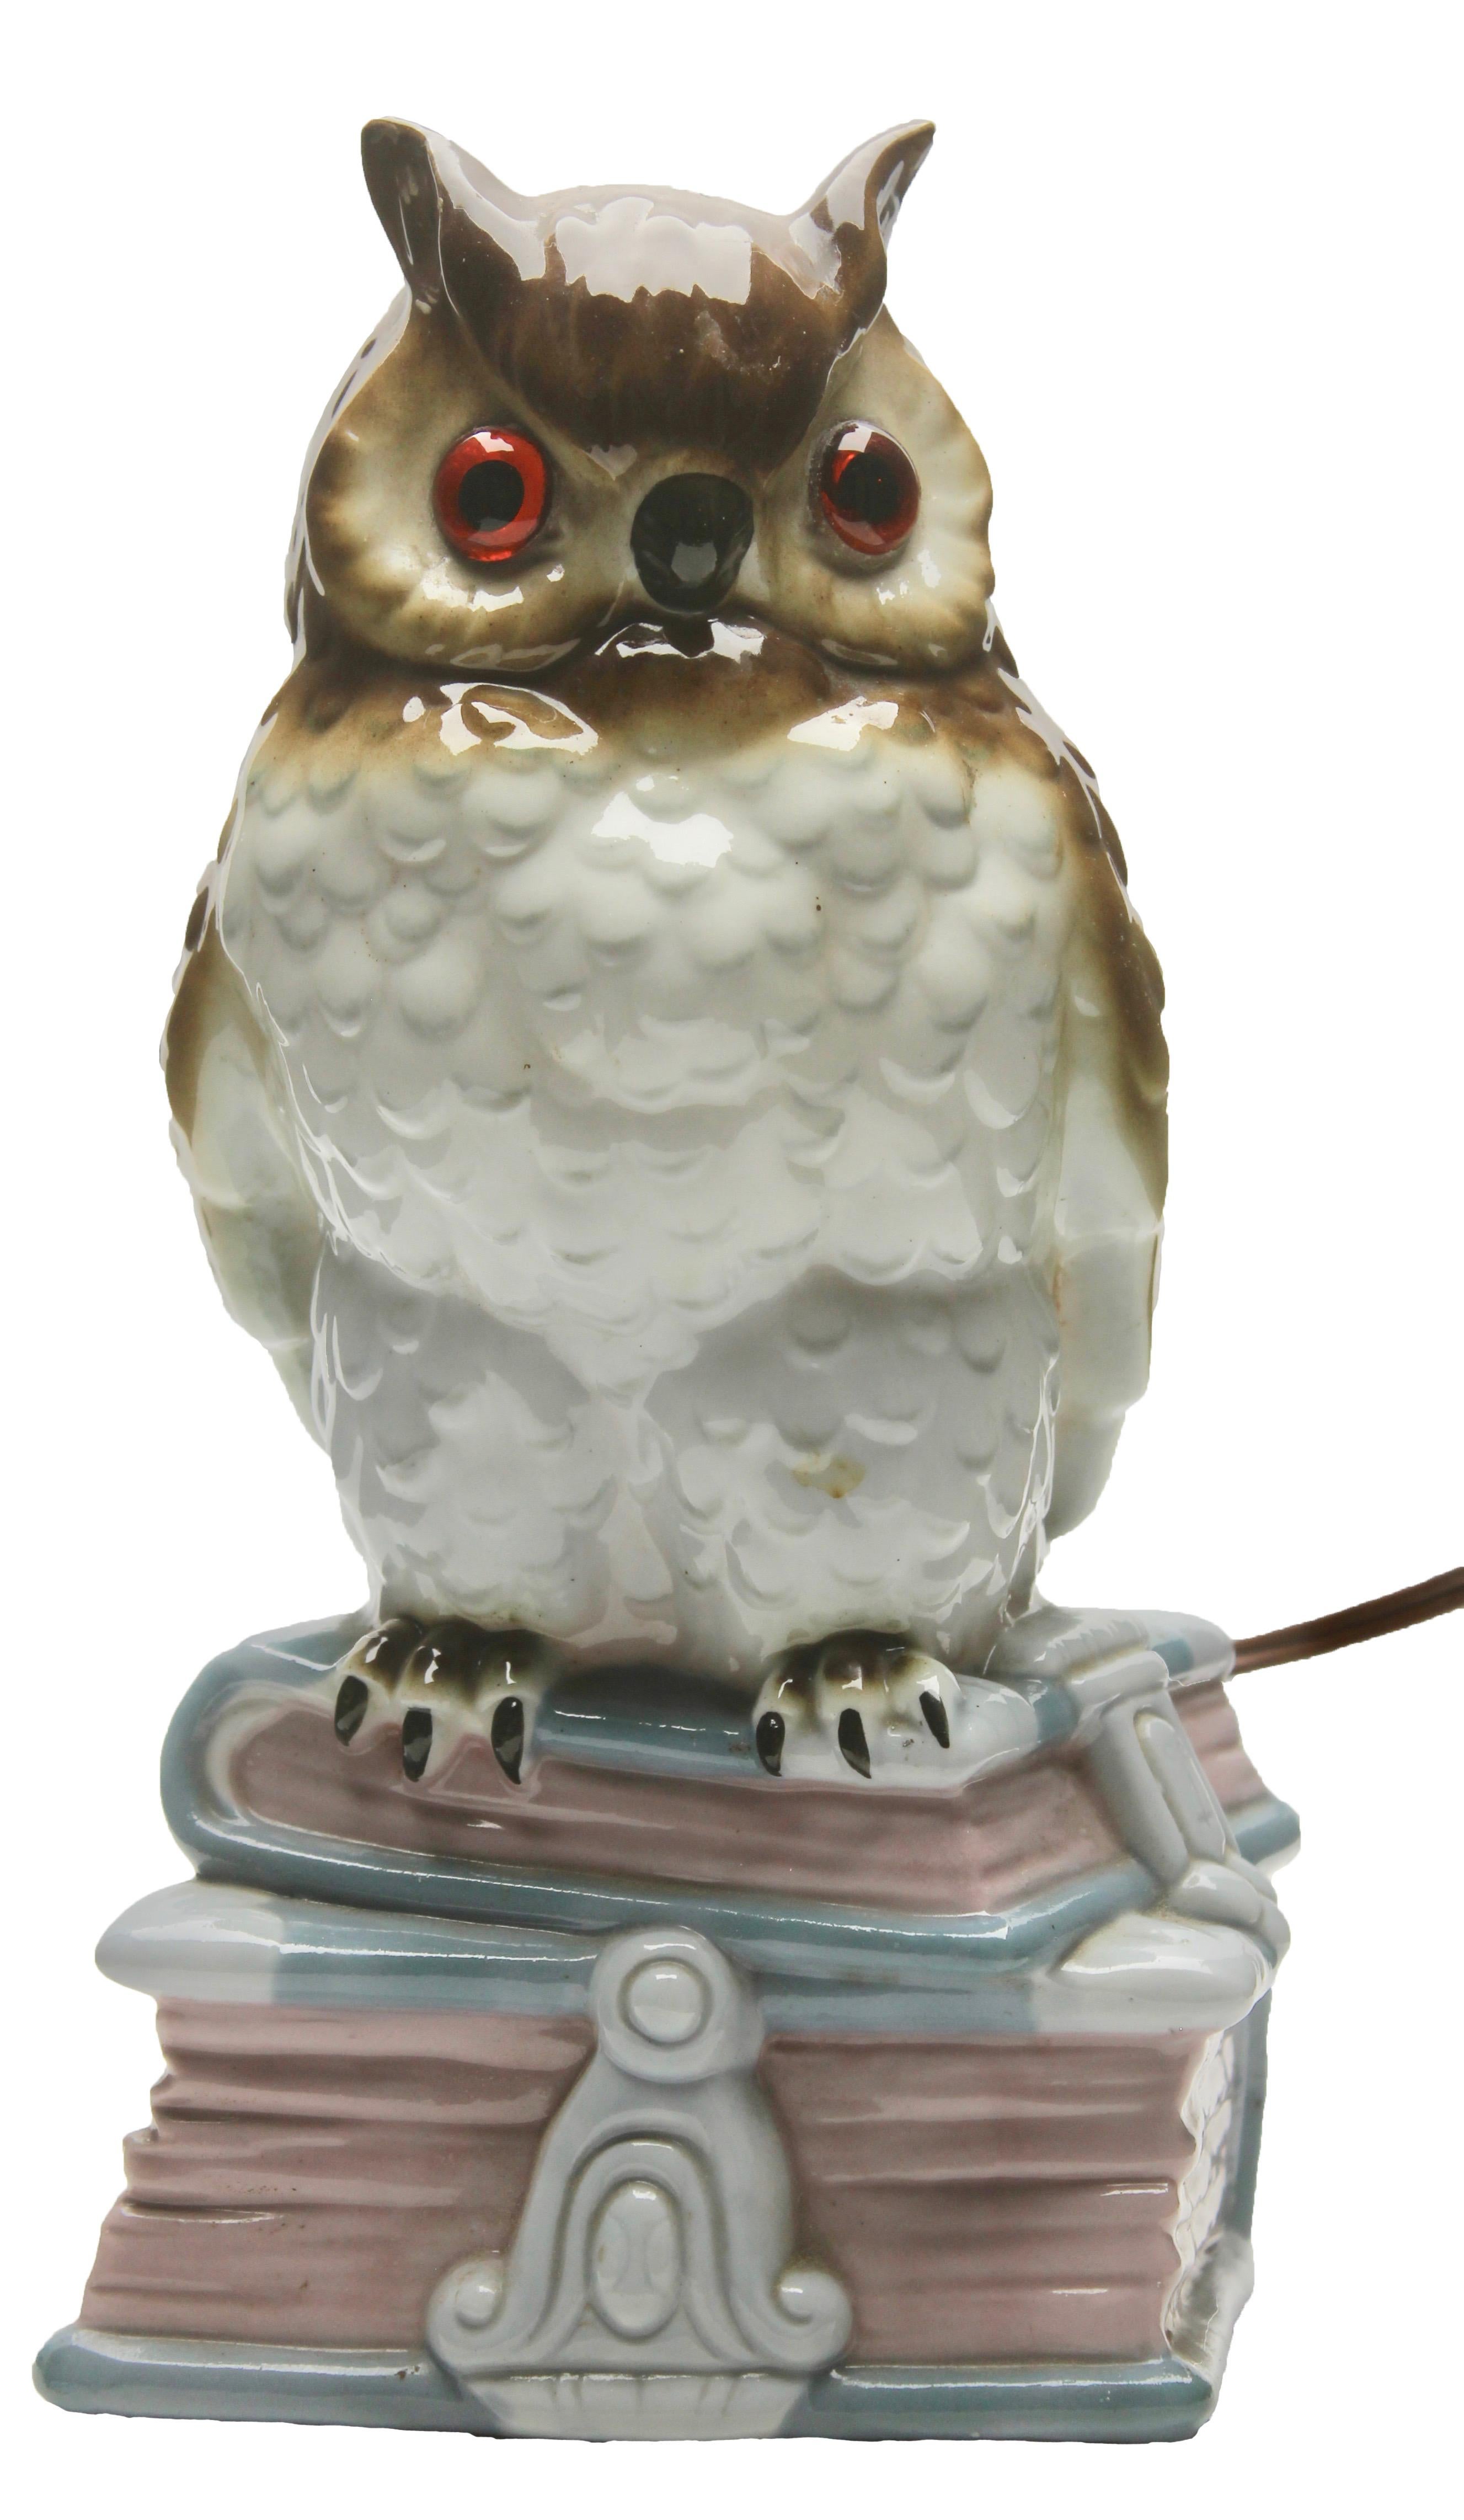 Perfume lamp in the form of an owl attributed to Carl Scheidig Grafenthal, Germany. 
Made from glazed porcelain. 
Electrical parts European standards with an inner light bulb (standard E 14) to give a warm and comforting night light. The light